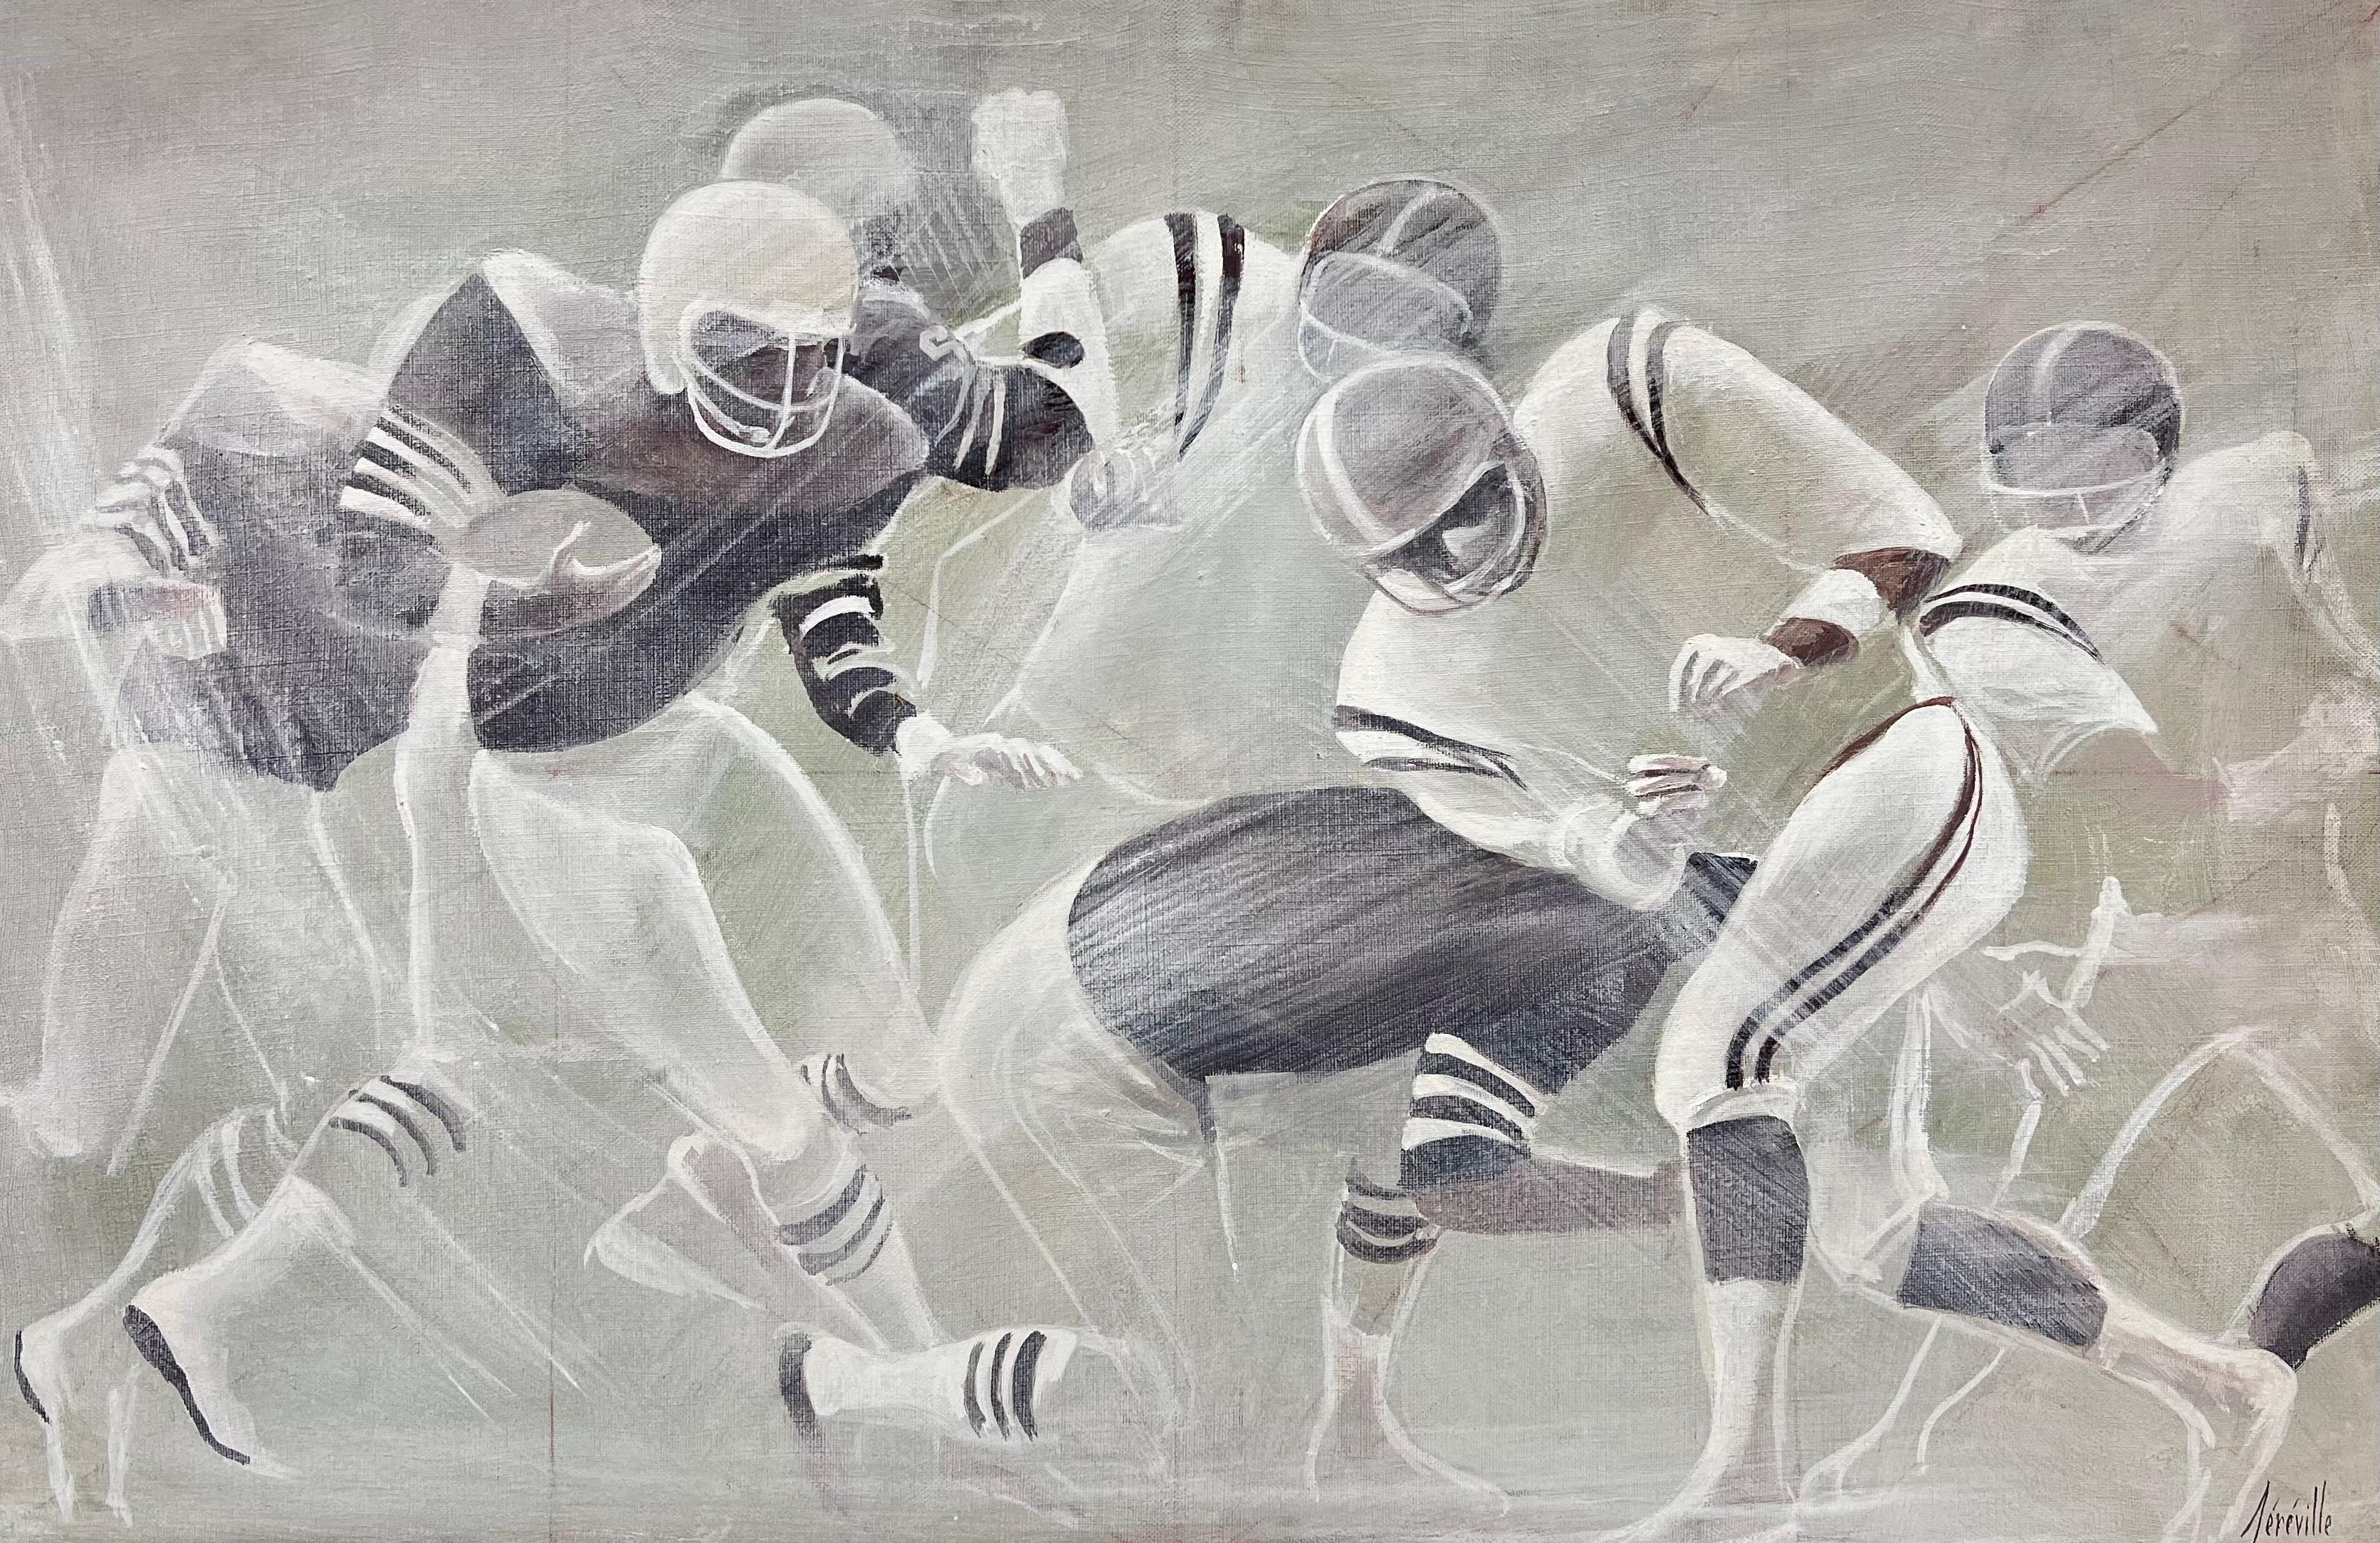 20th Century French School Figurative Painting - American Soccer Game, Dramatic 20th century Oil Painting, signed 1980's period